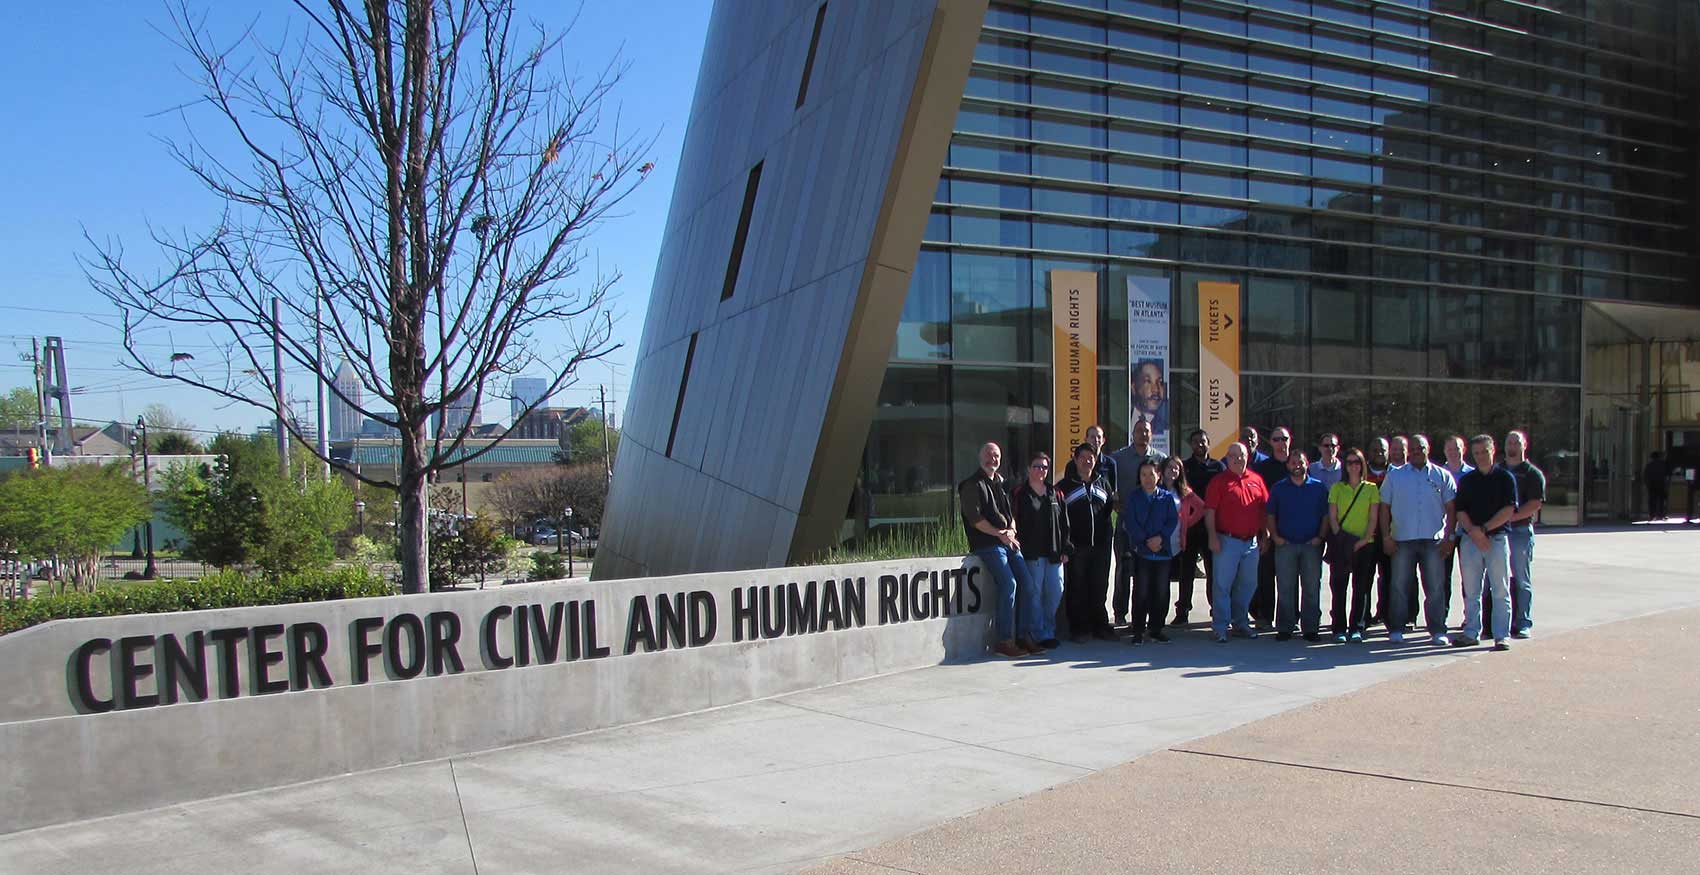 Group of people standing in front of Center for Civil and Human Rights building